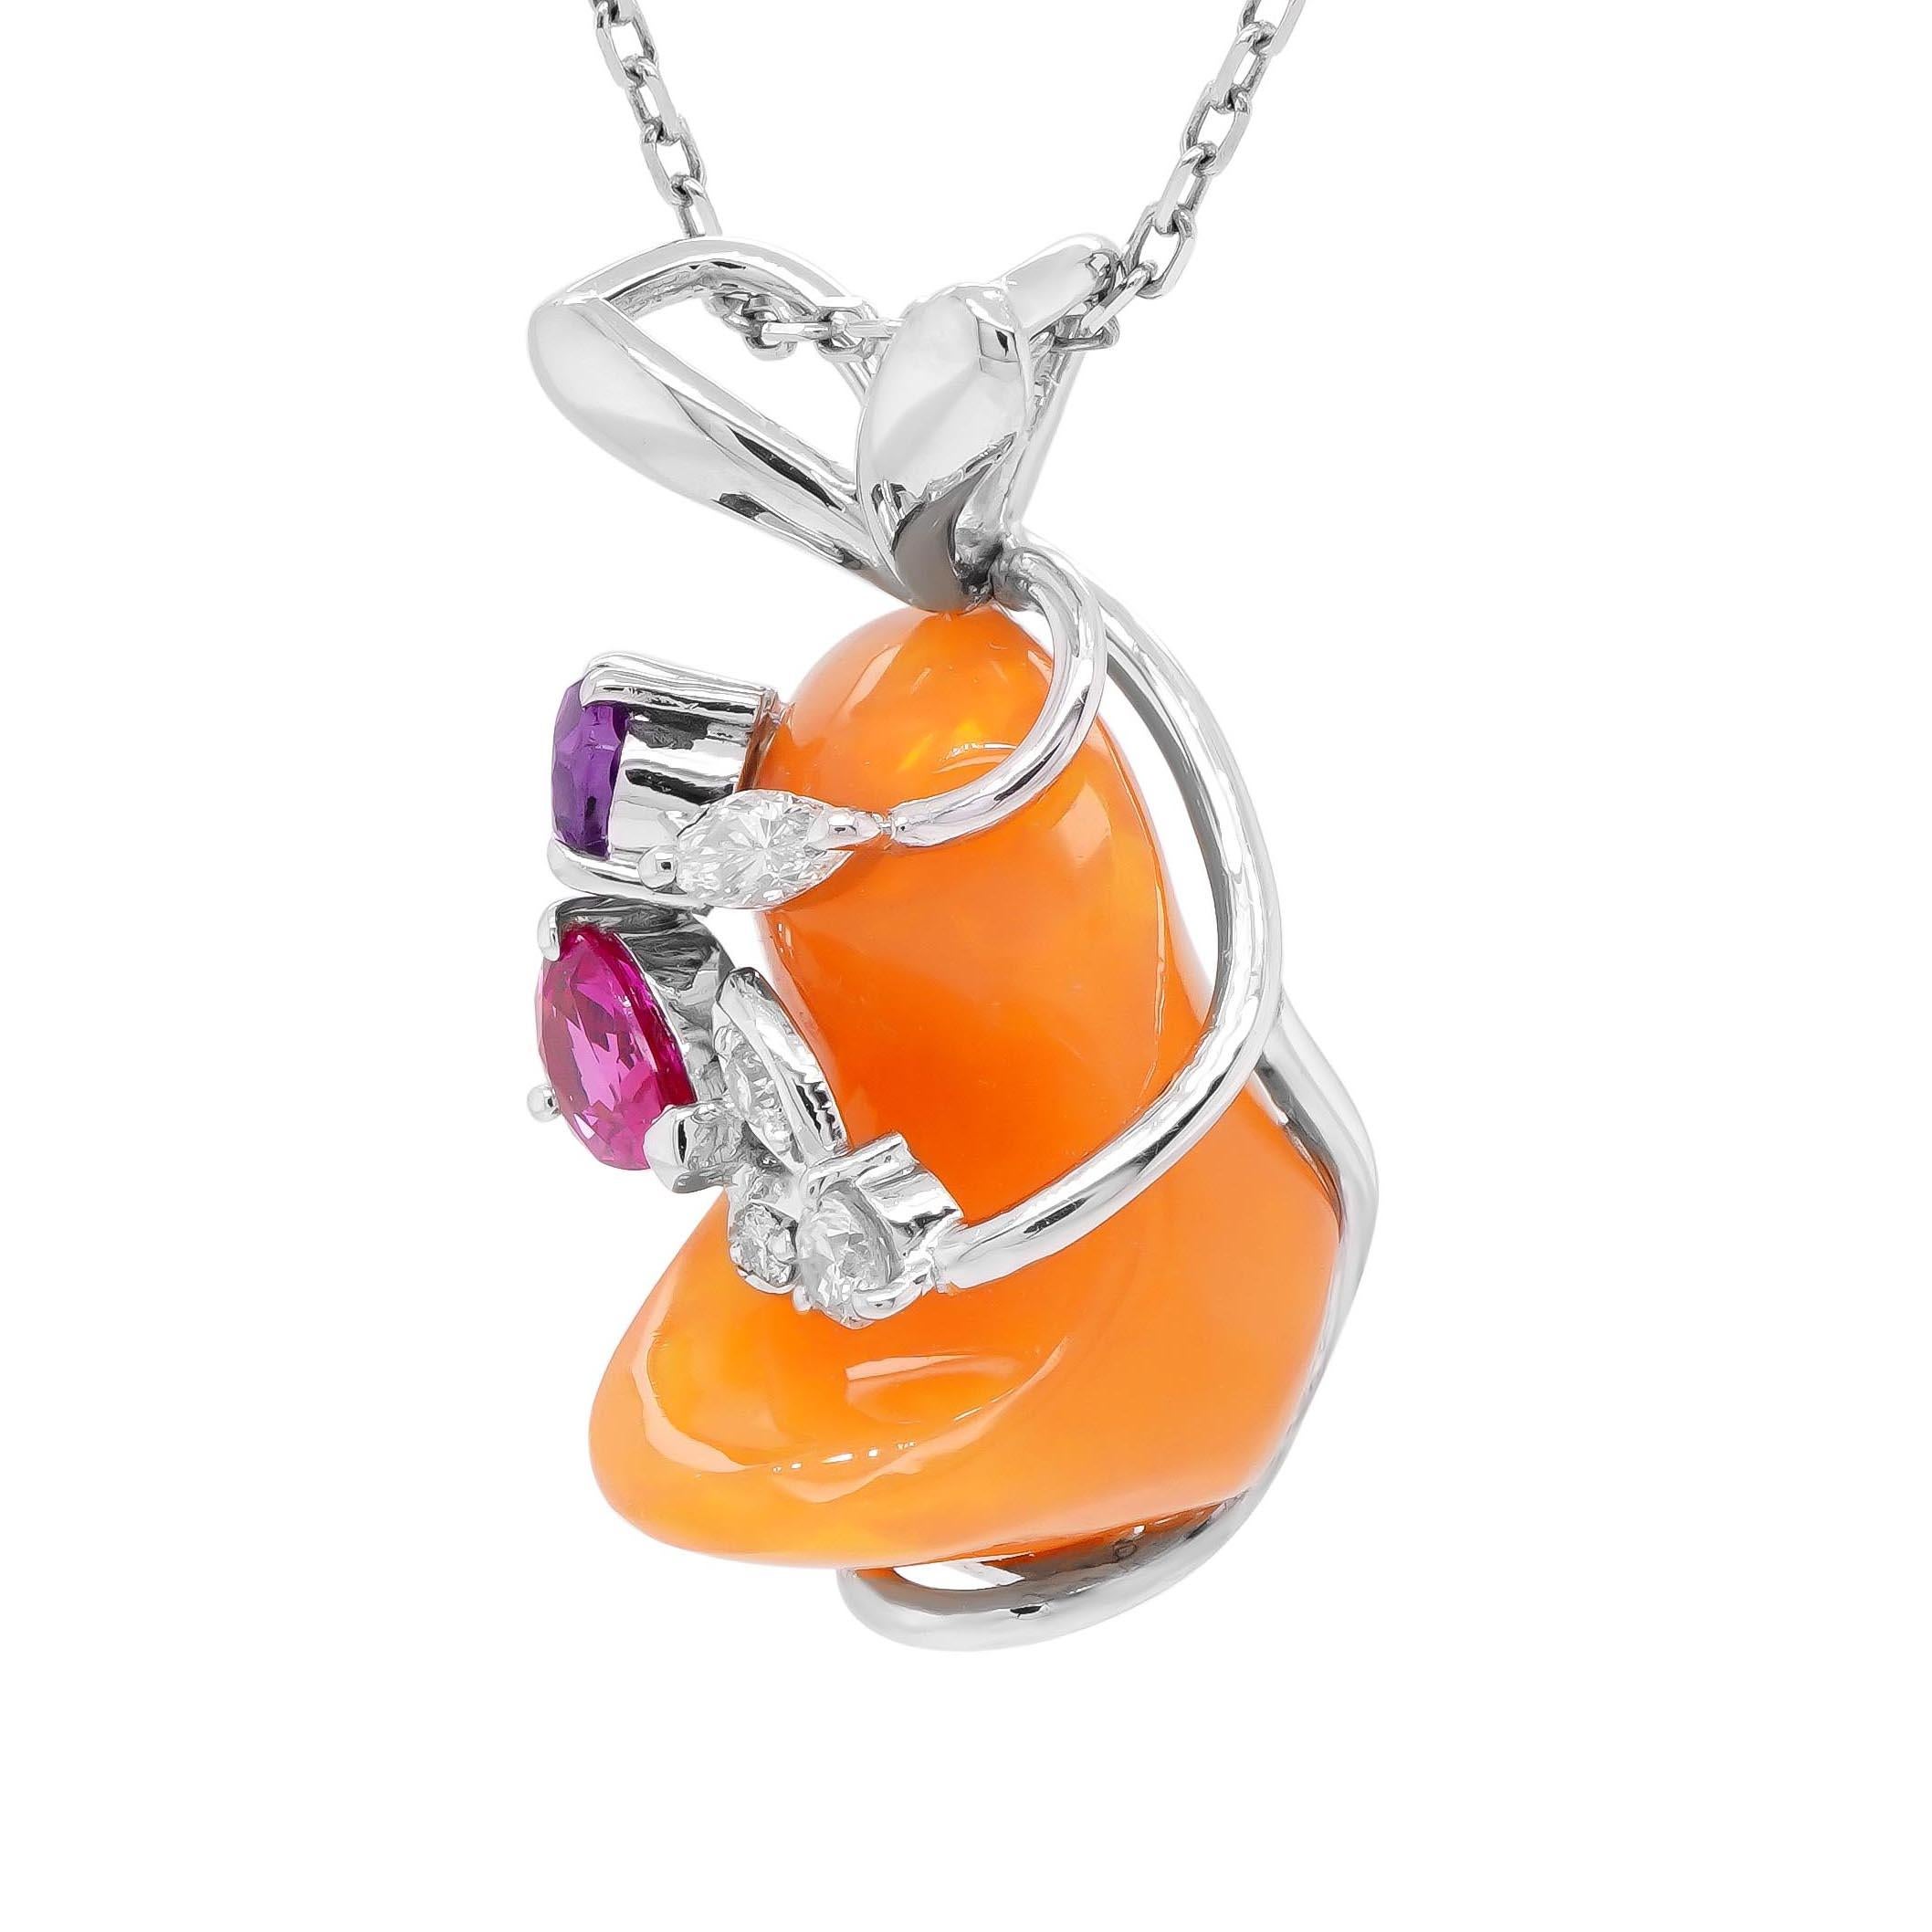 Our tweety bird pendant comprises a 7.12-carat orange opal decorated with a 0.21 carat, pear-shaped ruby and a 0.21-carat, oval-shaped amethyst, and white diamonds.

Opals are extremely rare specimens and are formed through the blend of water and